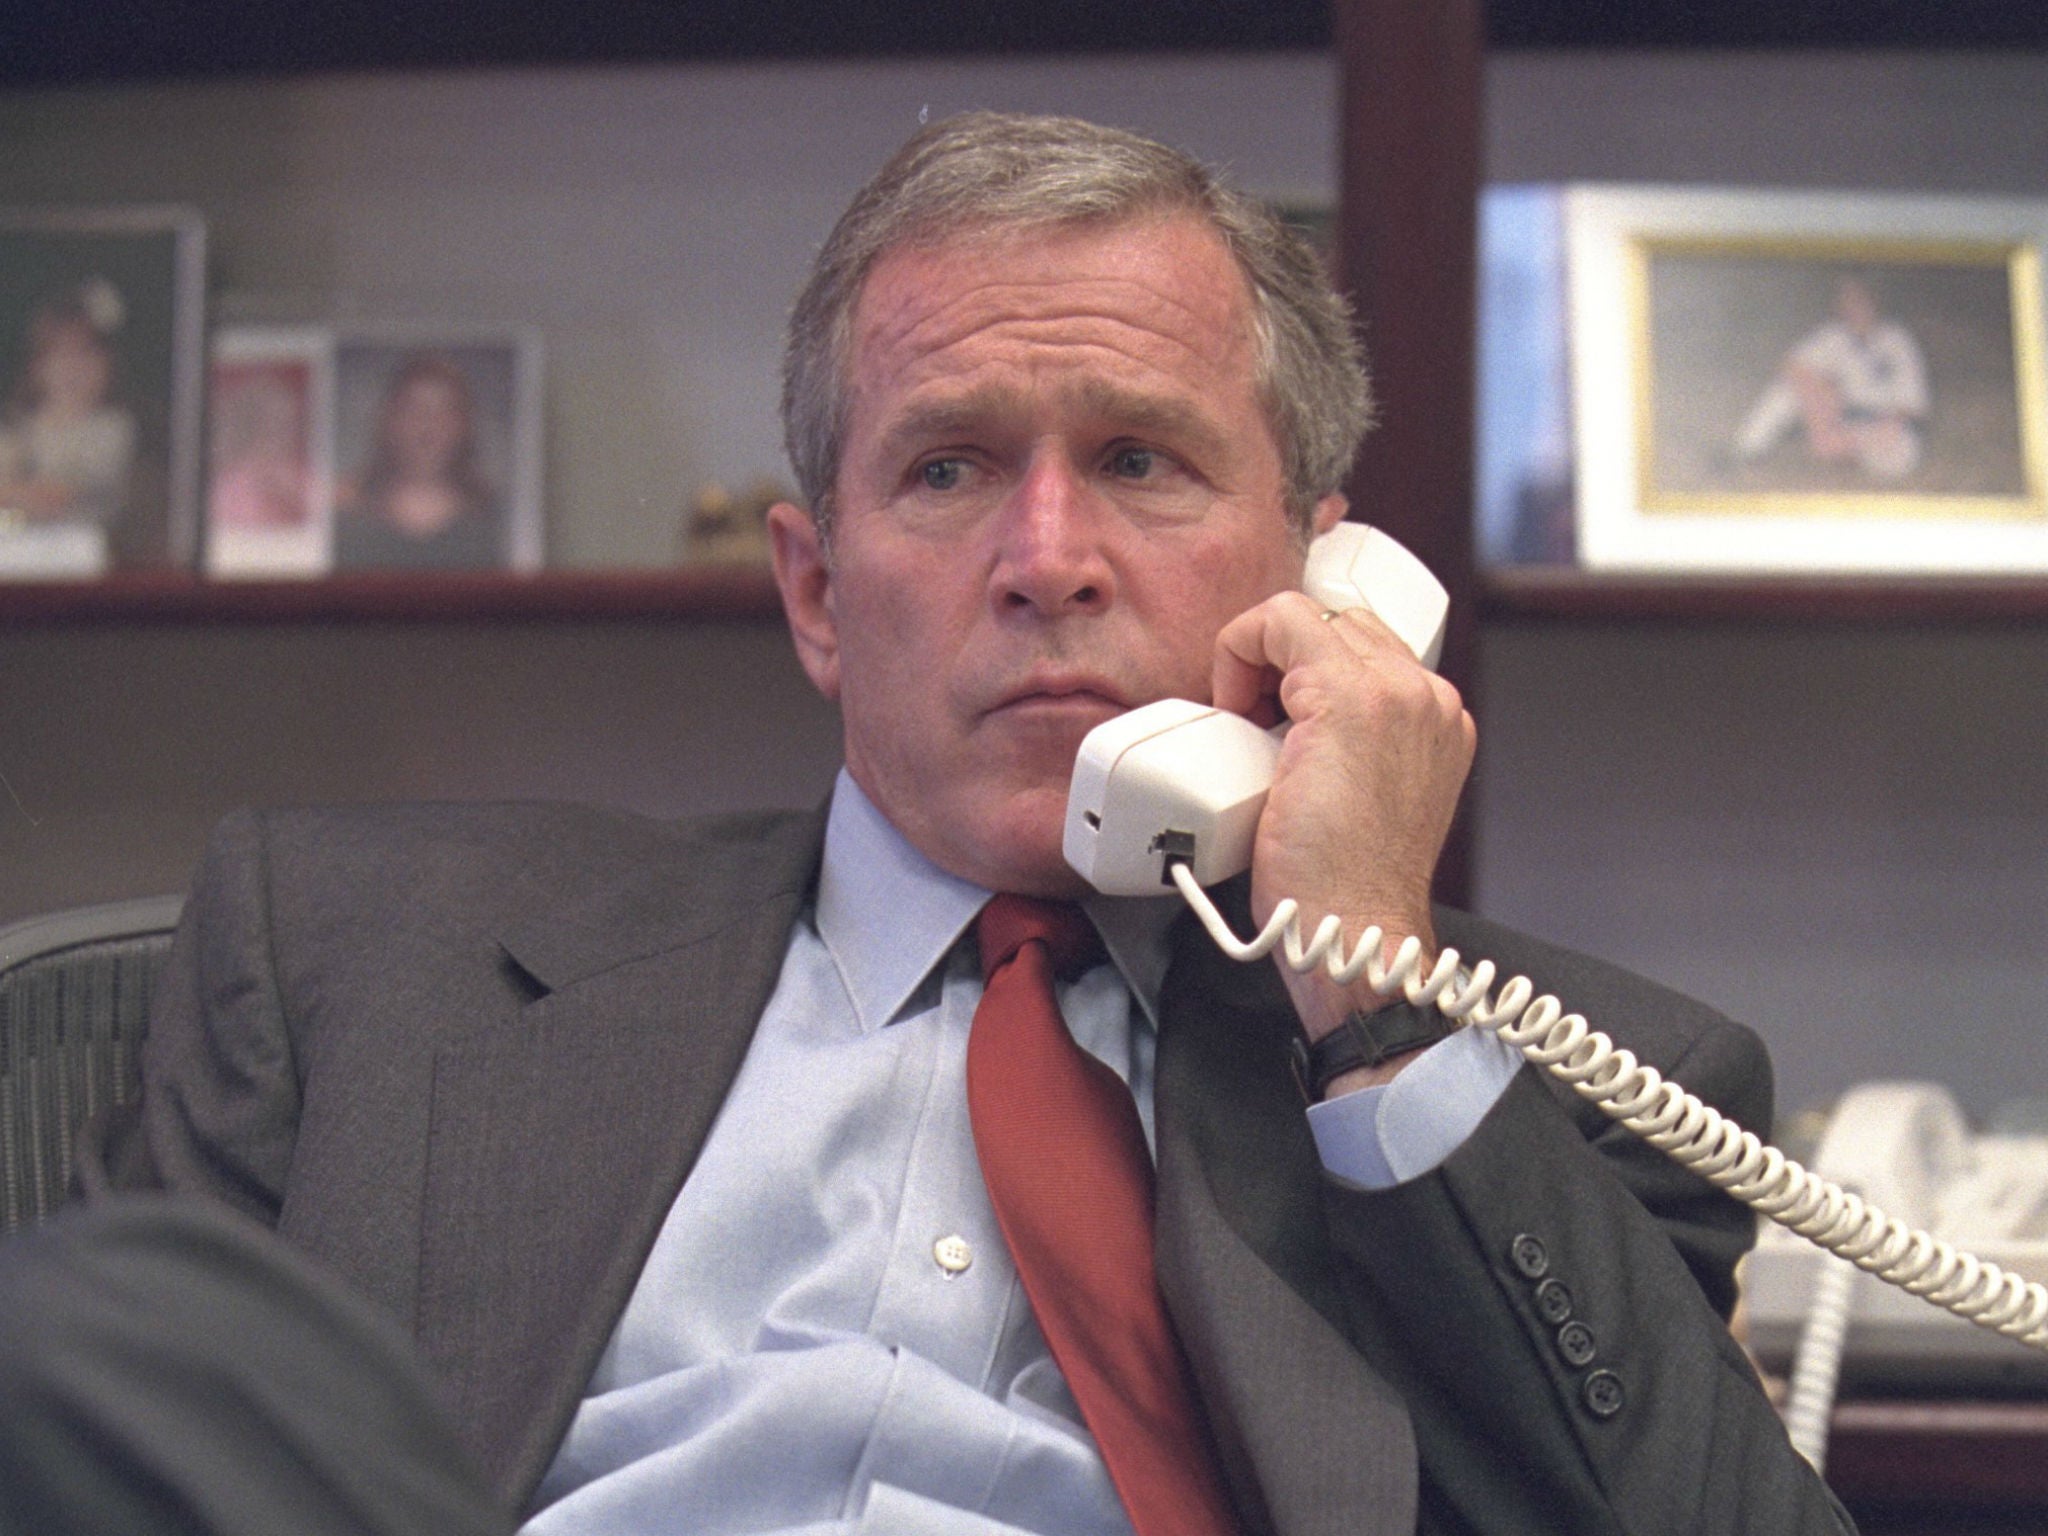 The former president takes a call at the Barksdale Air Force Base